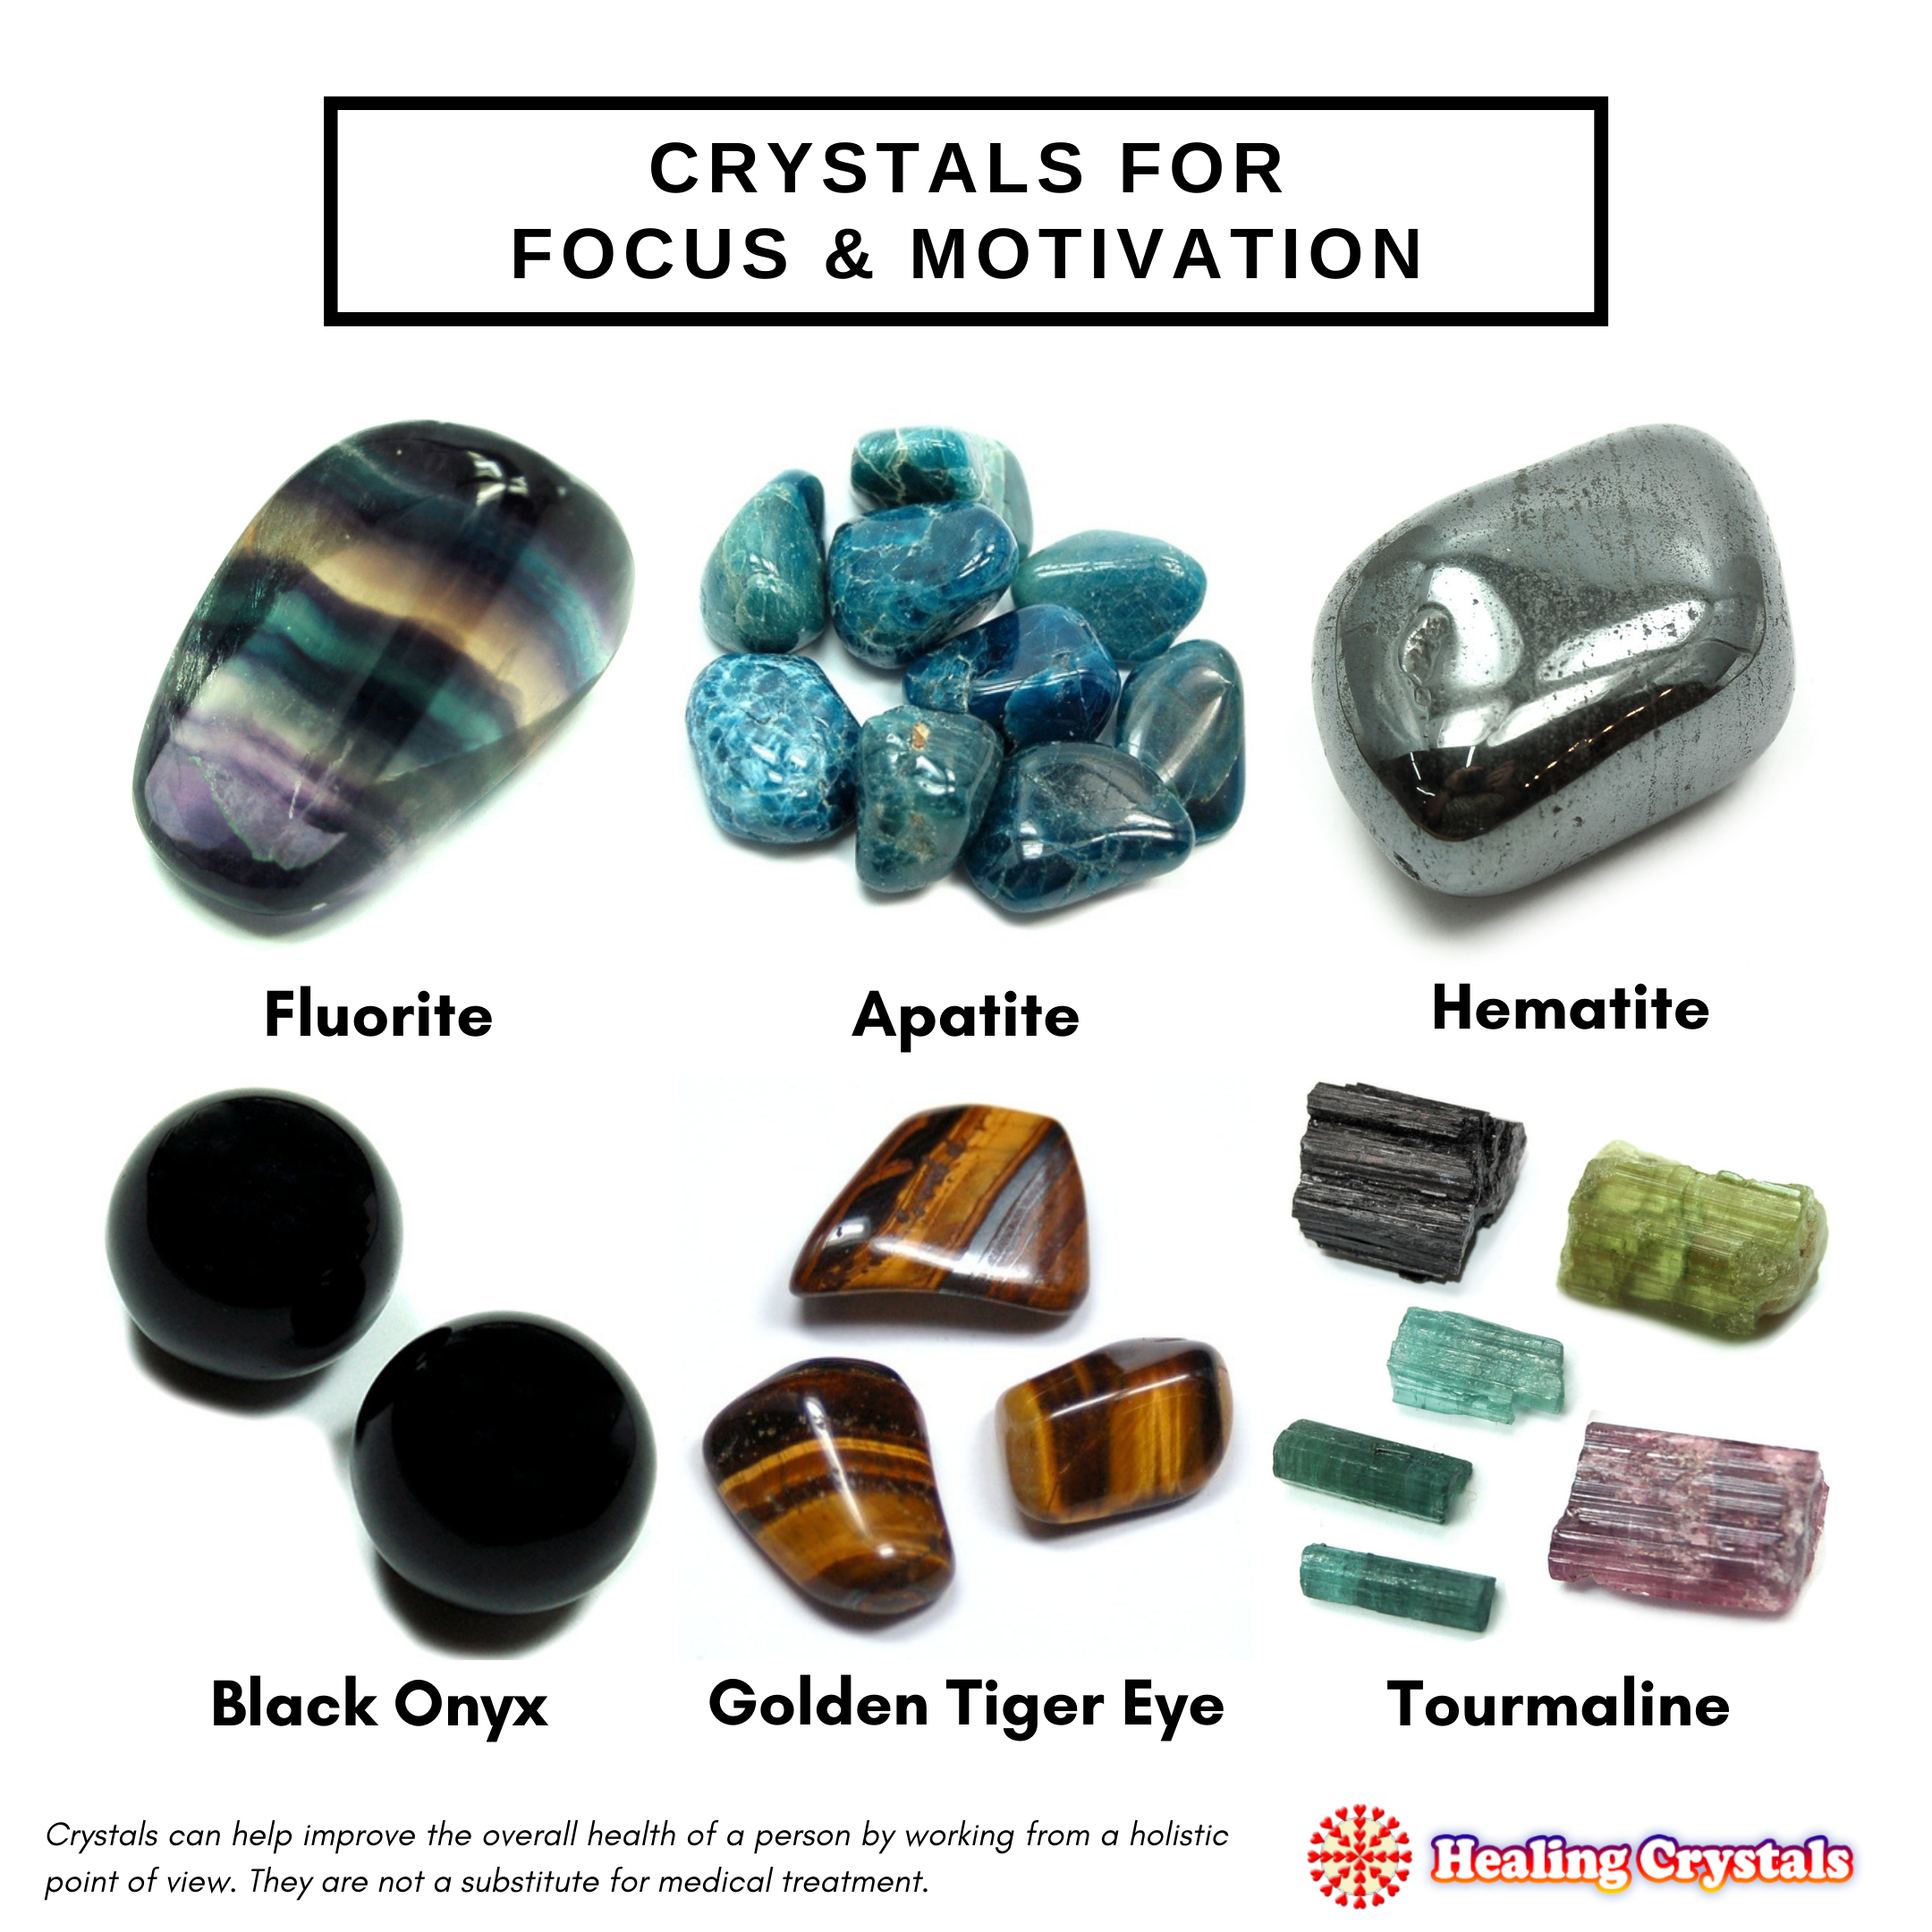 Crystals for Focus and Motivation